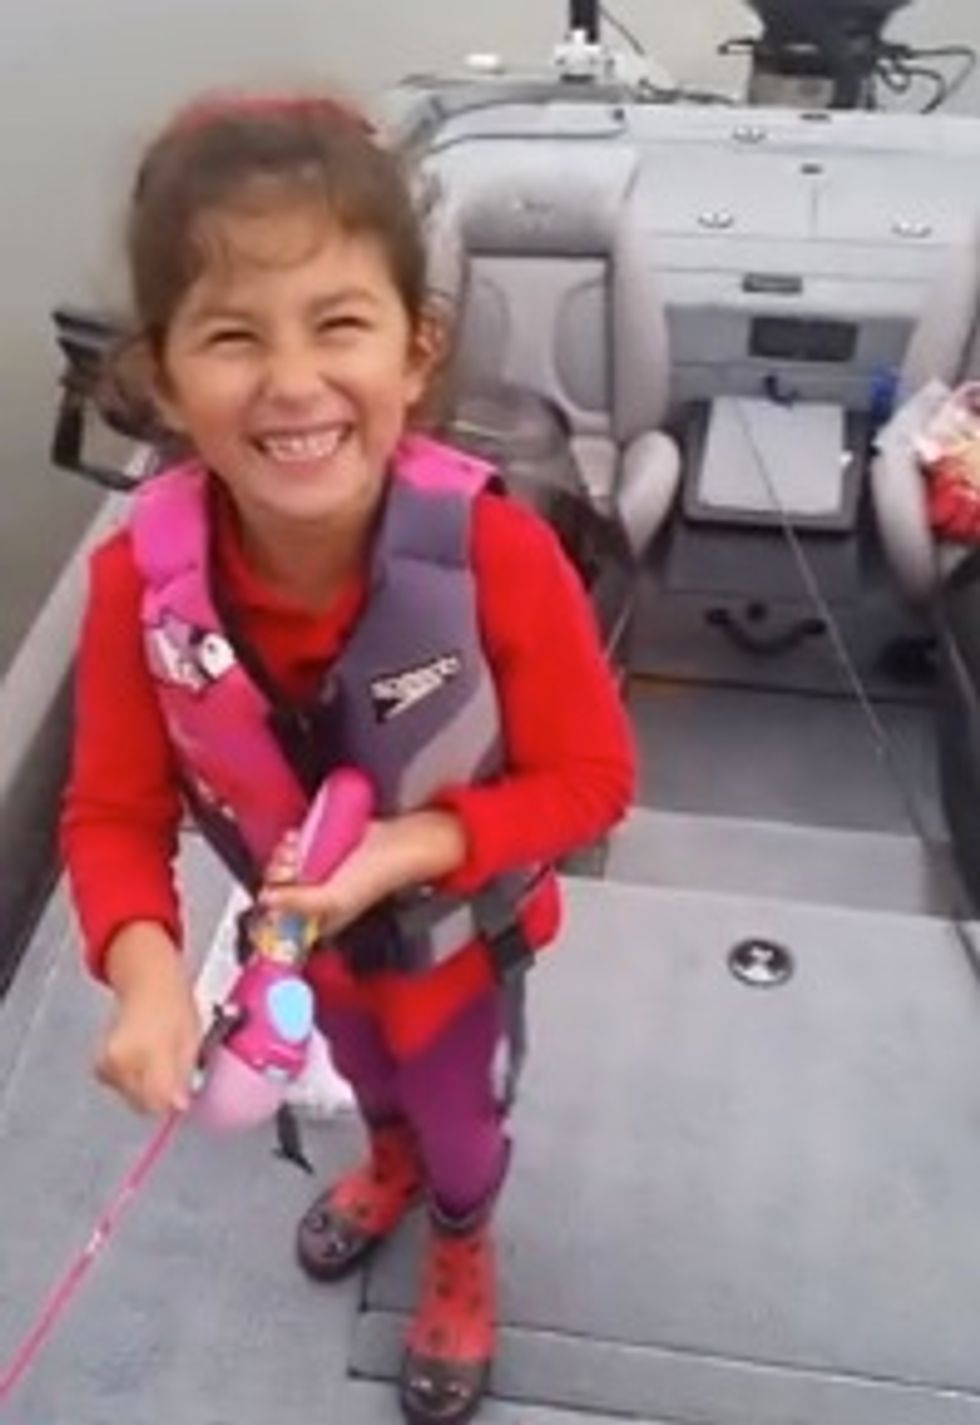 Little Girl With Her Barbie Fishing Pole ‘Crushes Huge Bass’